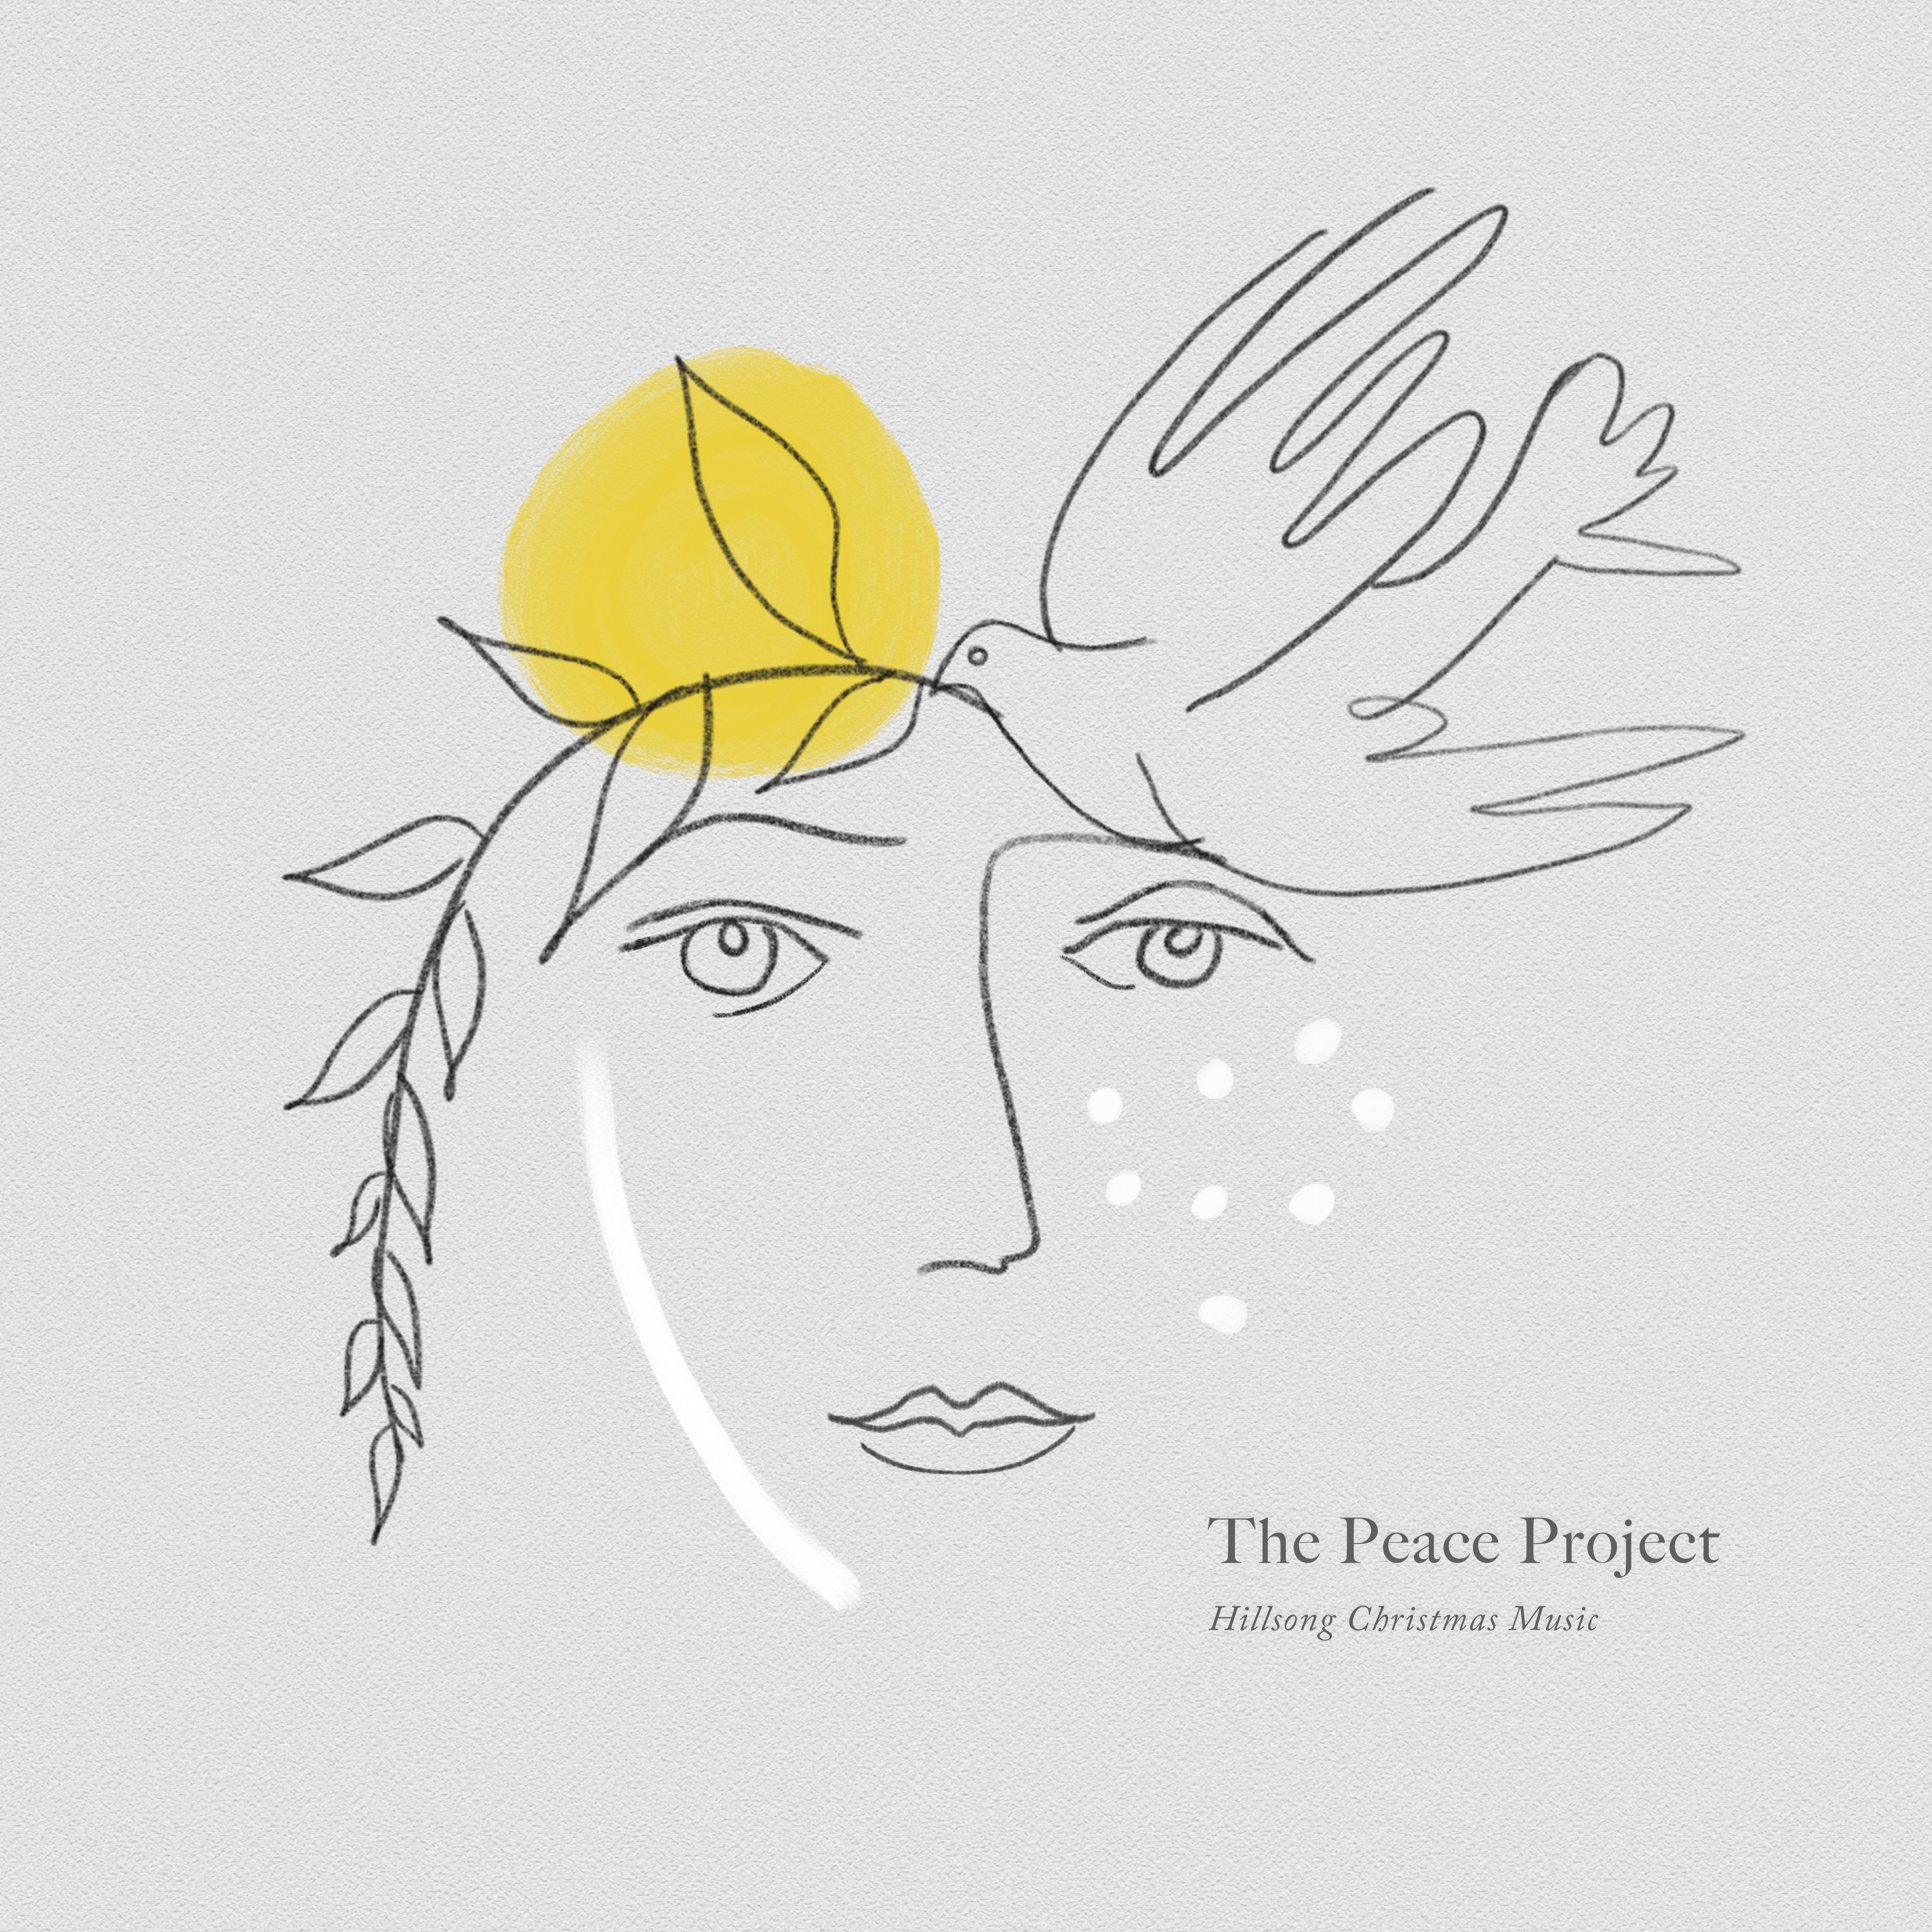 The Peace Project HS Christmas